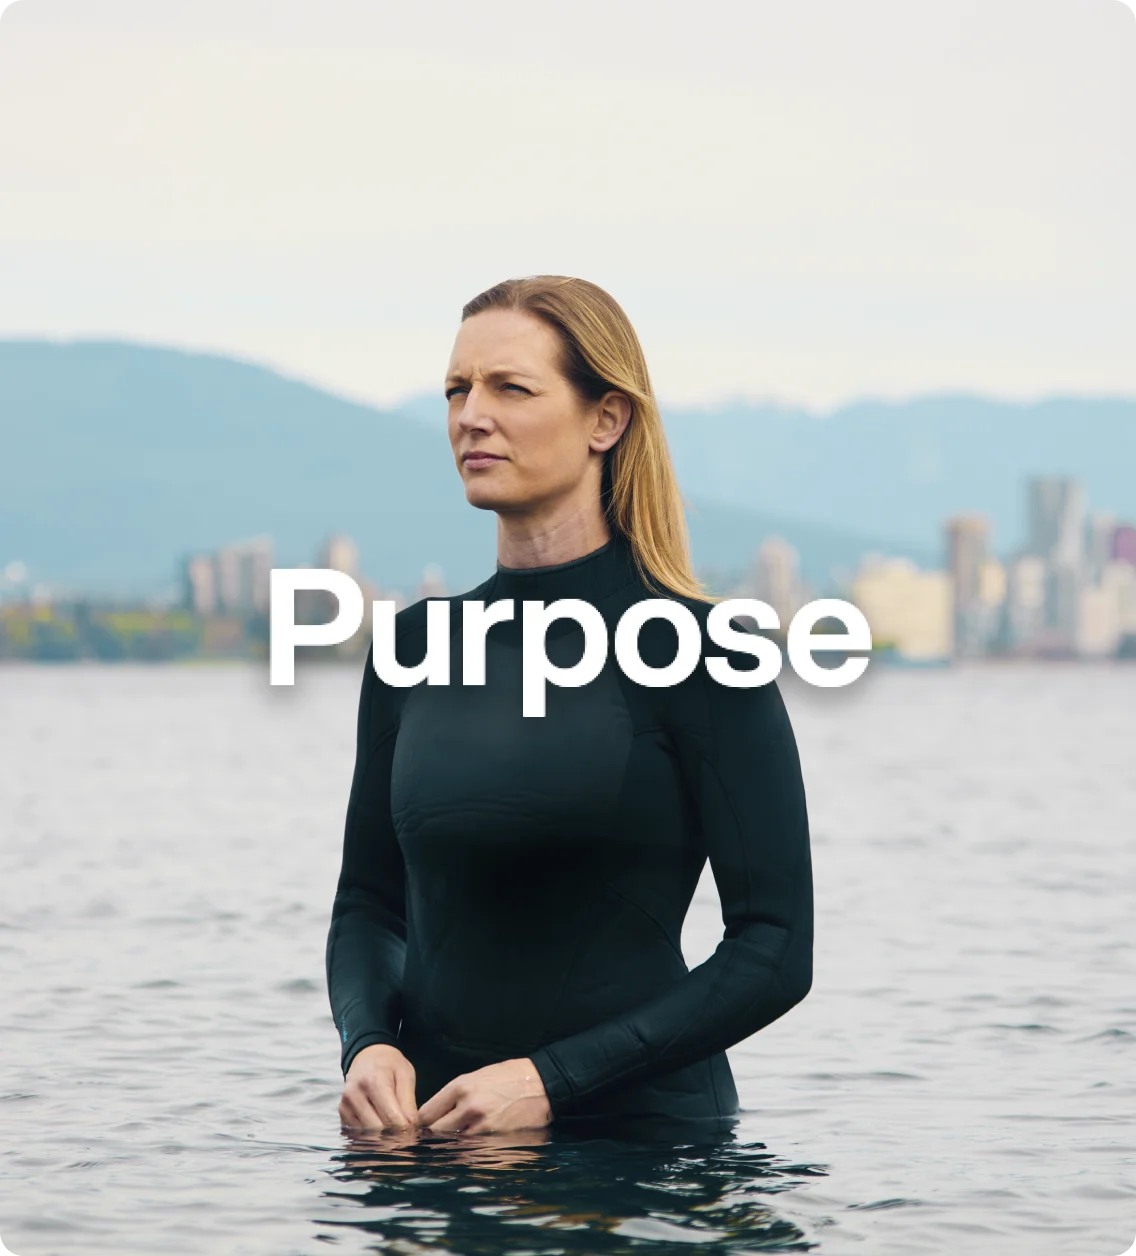 Carlyn Loncaric wearing scuba suit standing in water against skyline overlaid with word “purpose”